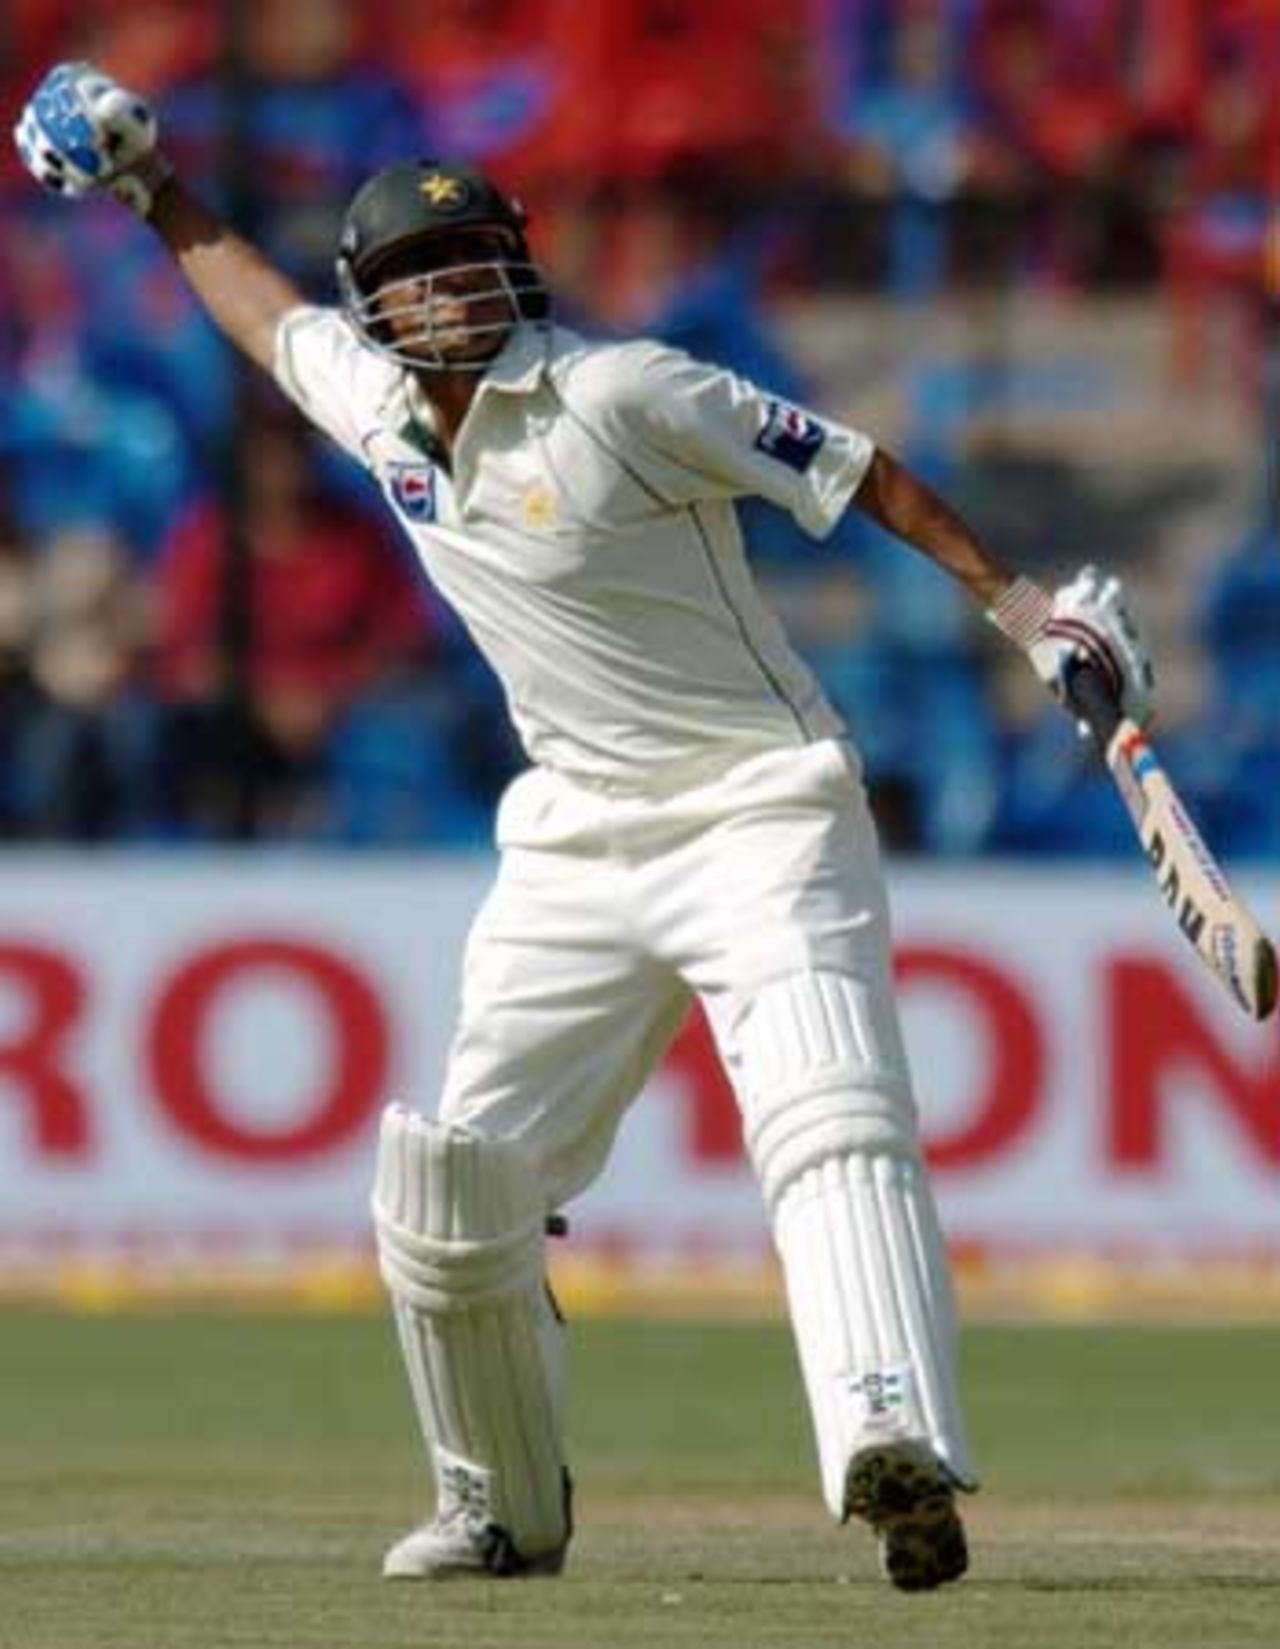 Younis Khan also reached his hundred, and had every reason to celebrate wildly, India v Pakistan, 3rd Test, Bangalore, 1st day, March 24, 2005